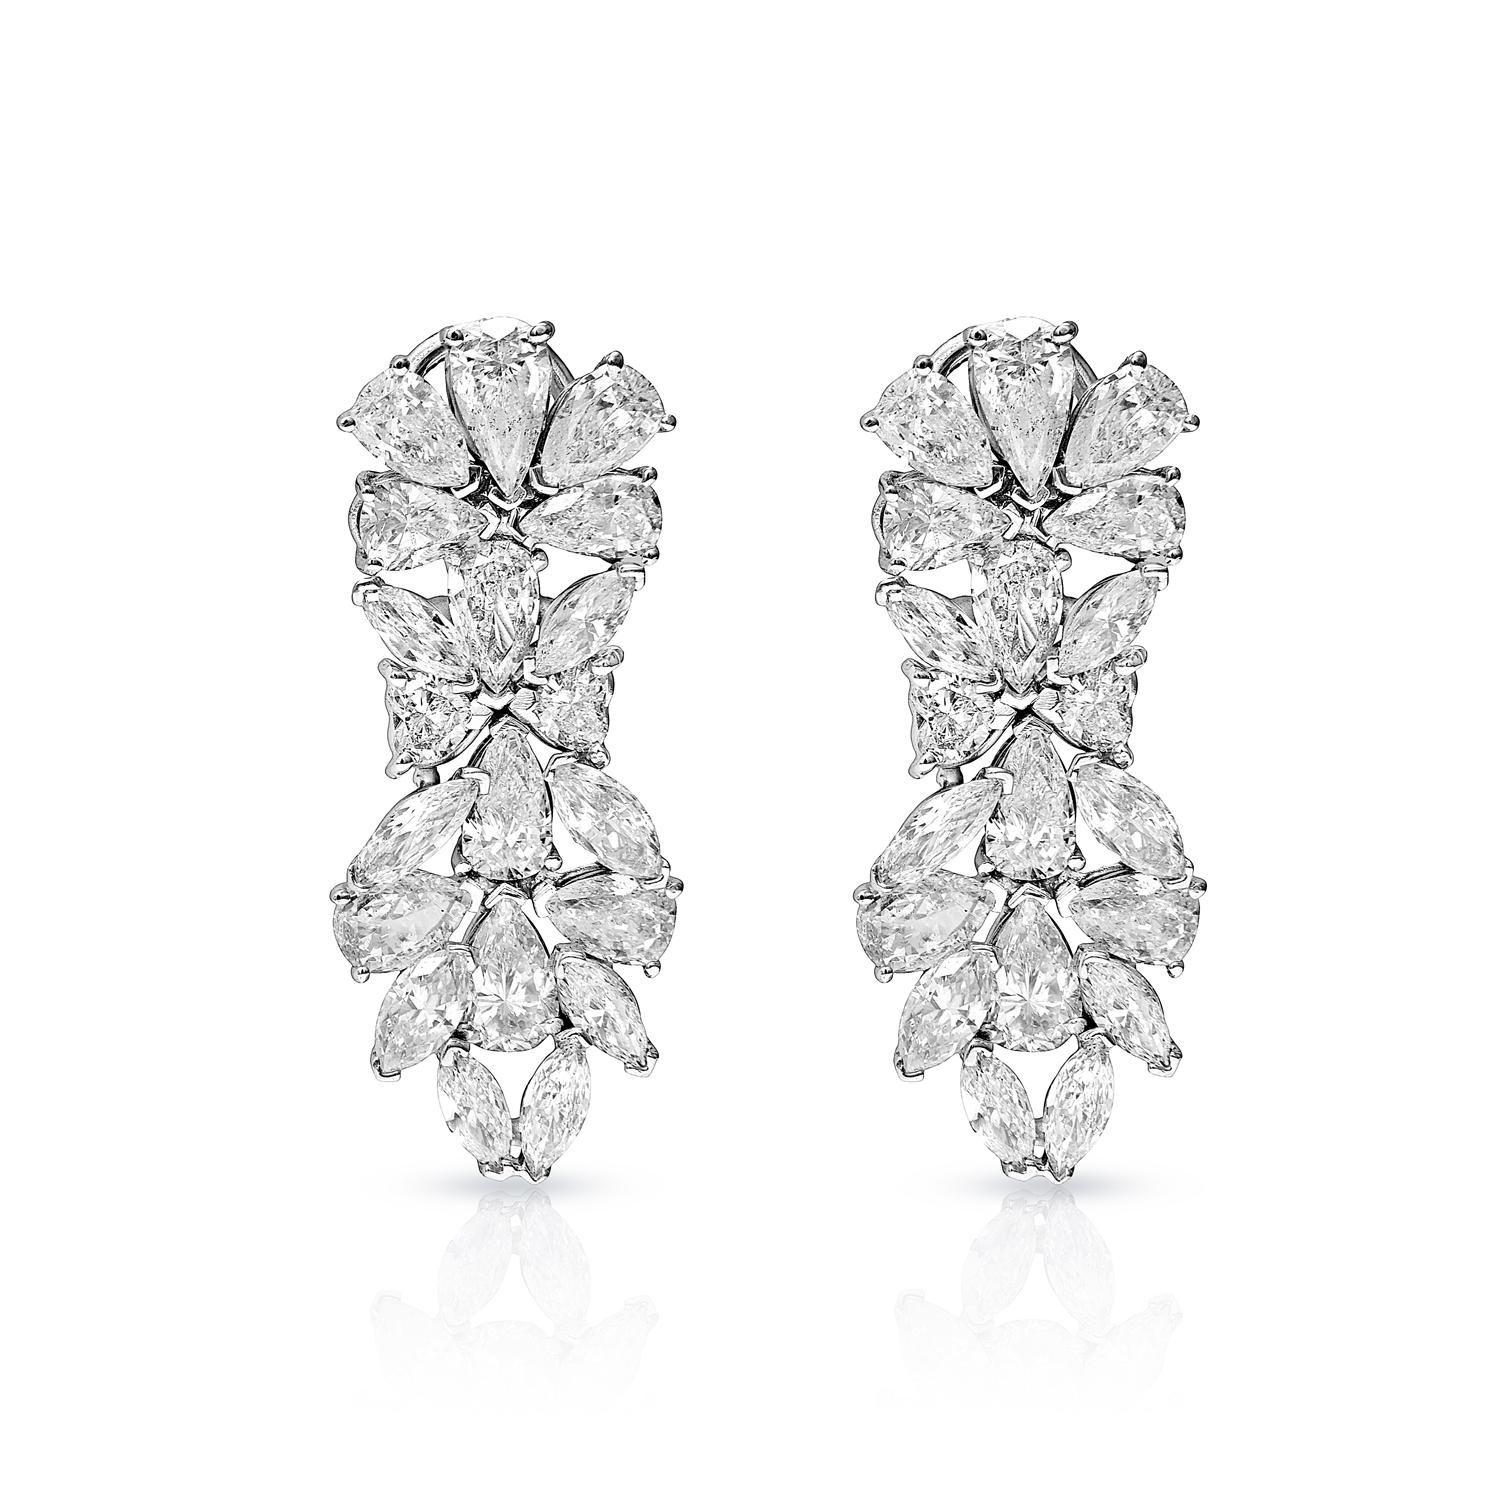 Diamond Drop Earrings For Ladies:

Carat Weight: 13.00 Carats
Style: Combined Mixed Shape (CMB)
Metal: 14 Karat White Gold
Style: Drop Earrings